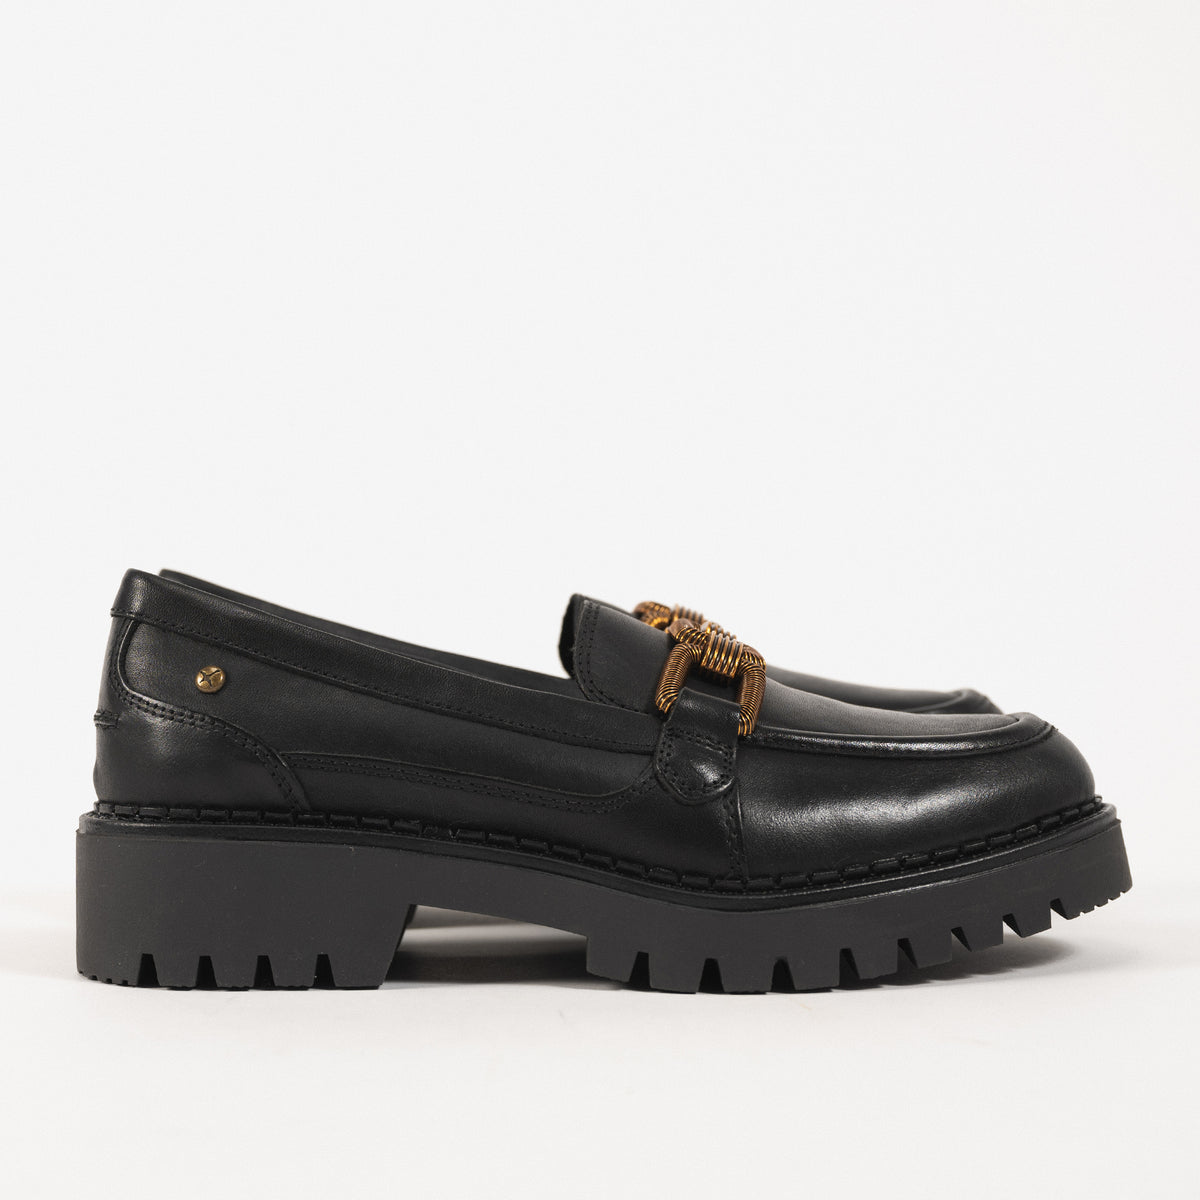 AVILES CHAIN LOAFER - BLACK - LEATHER